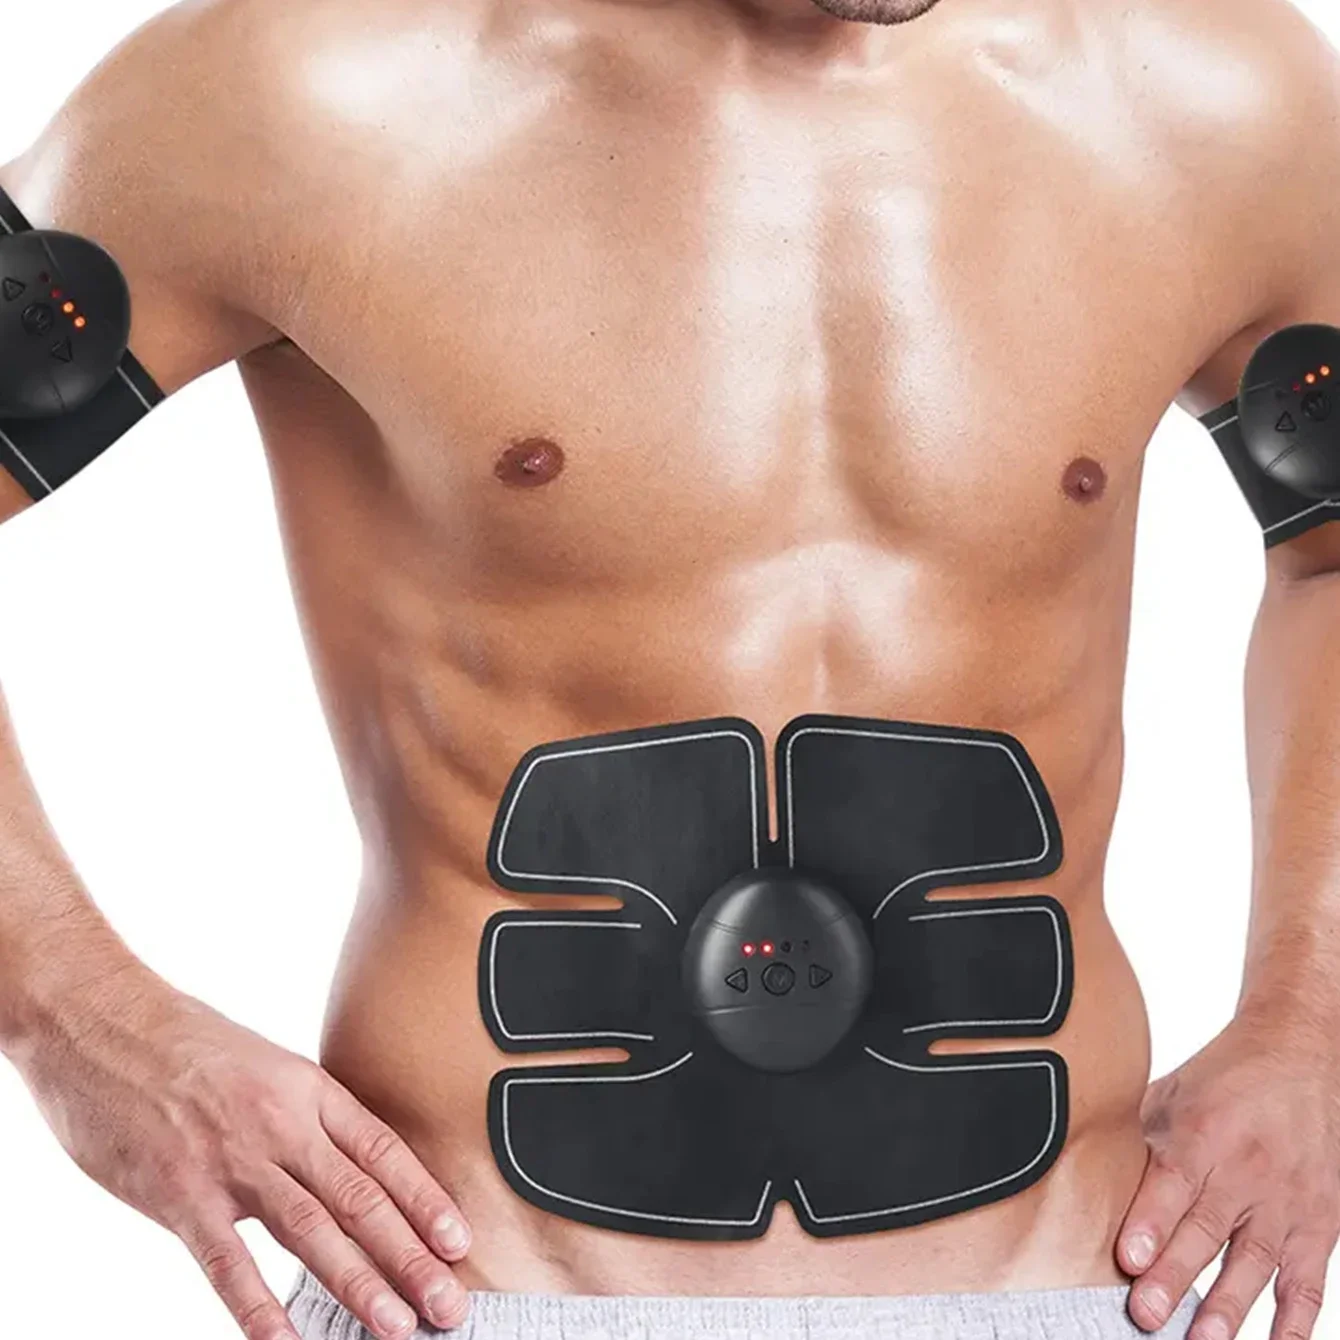 

Remote Control Ems Muscle Electrical Nerve And Muscle Stimulators